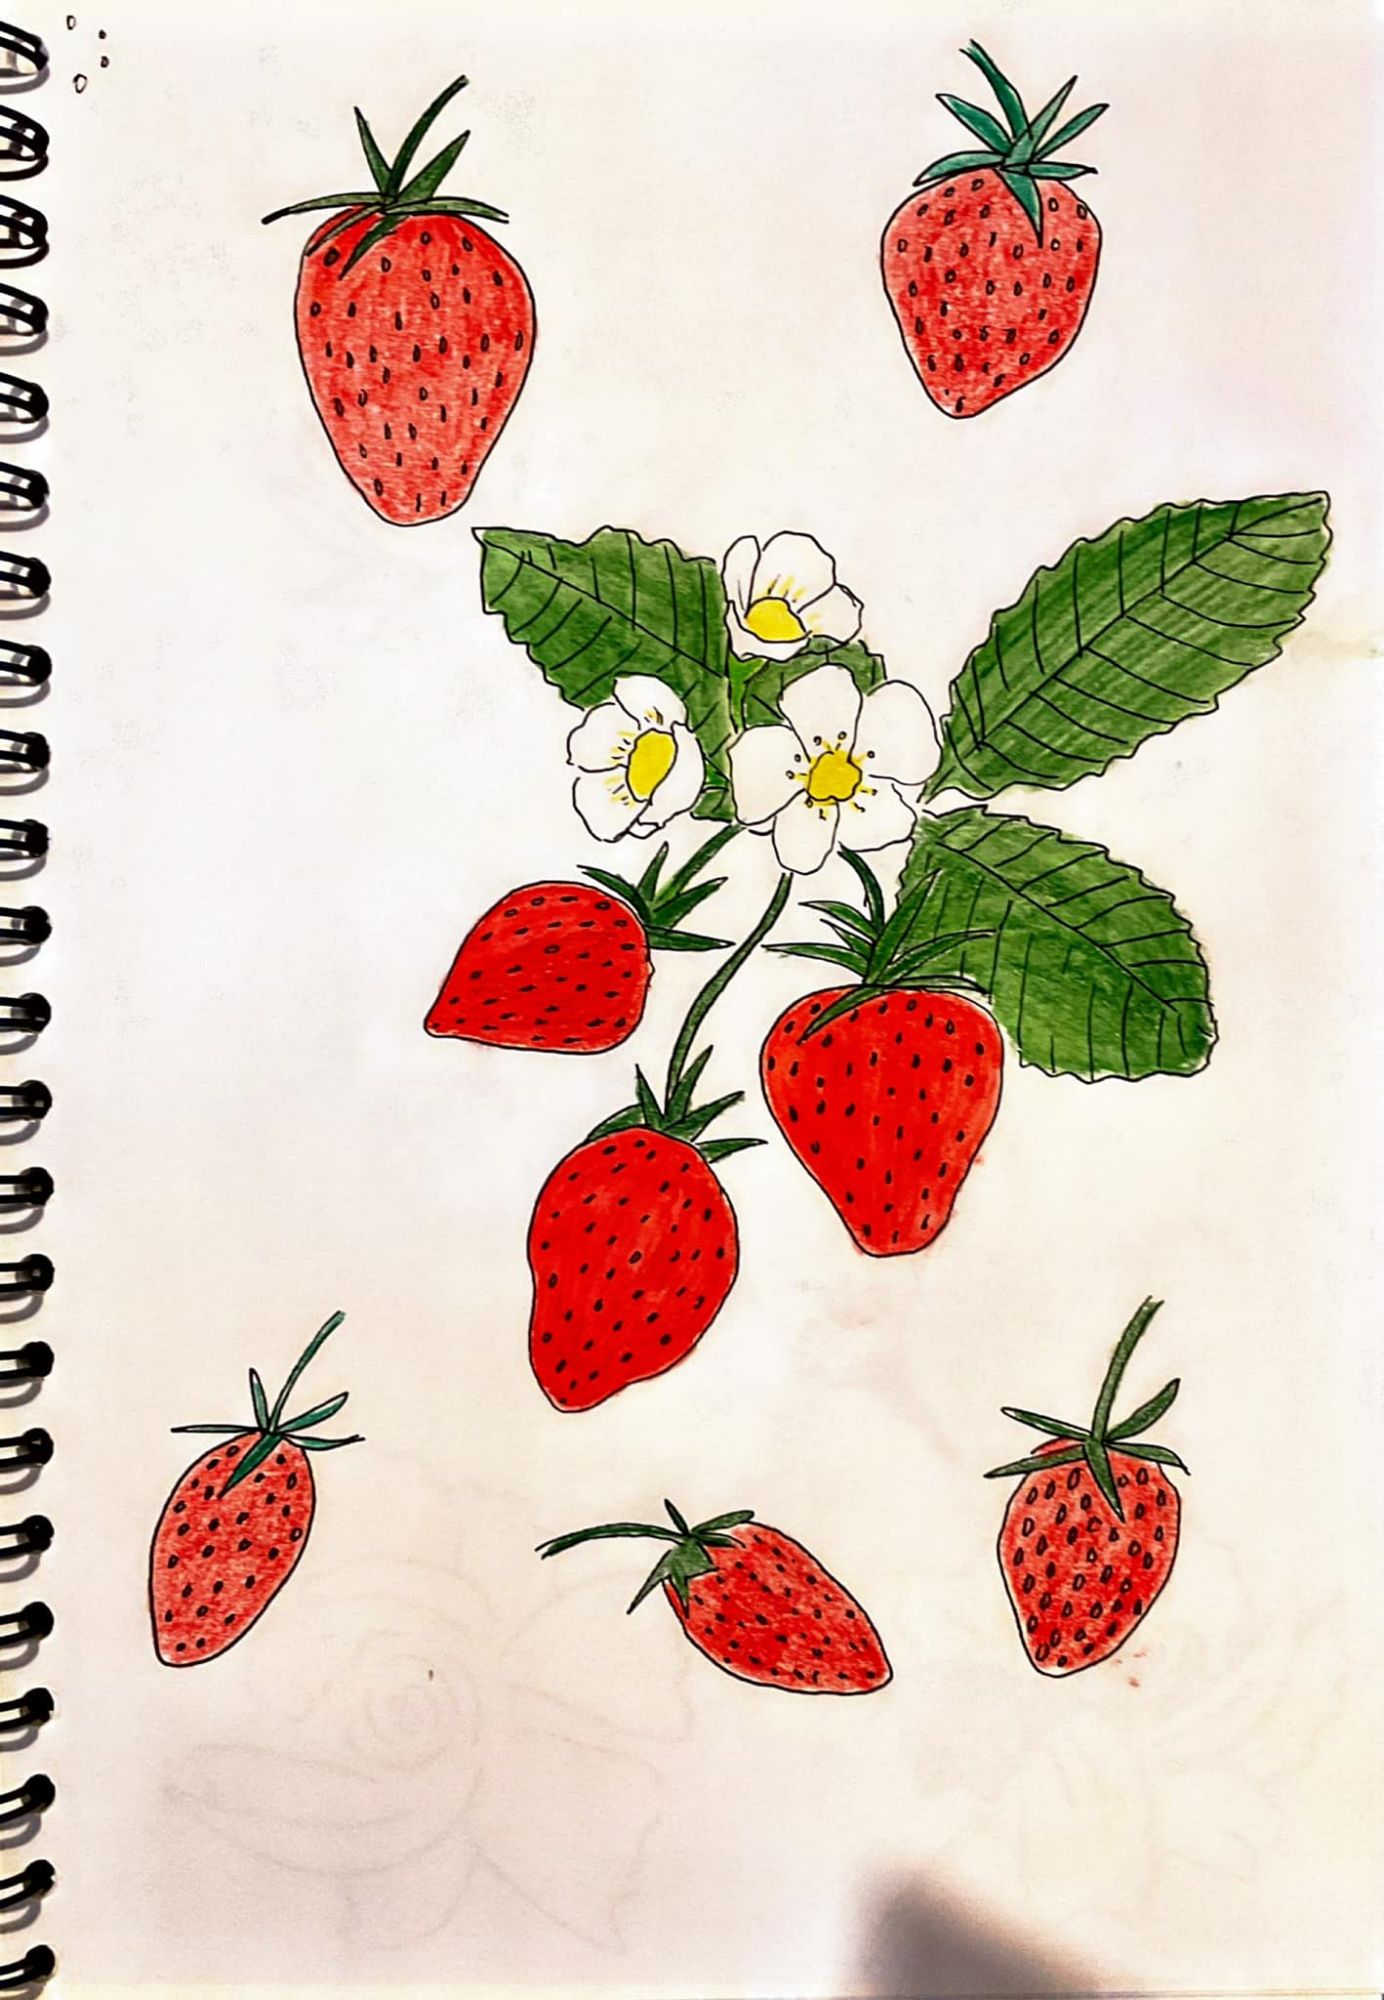 A handrawn image of strawberries and strawberry flowers against green leaves